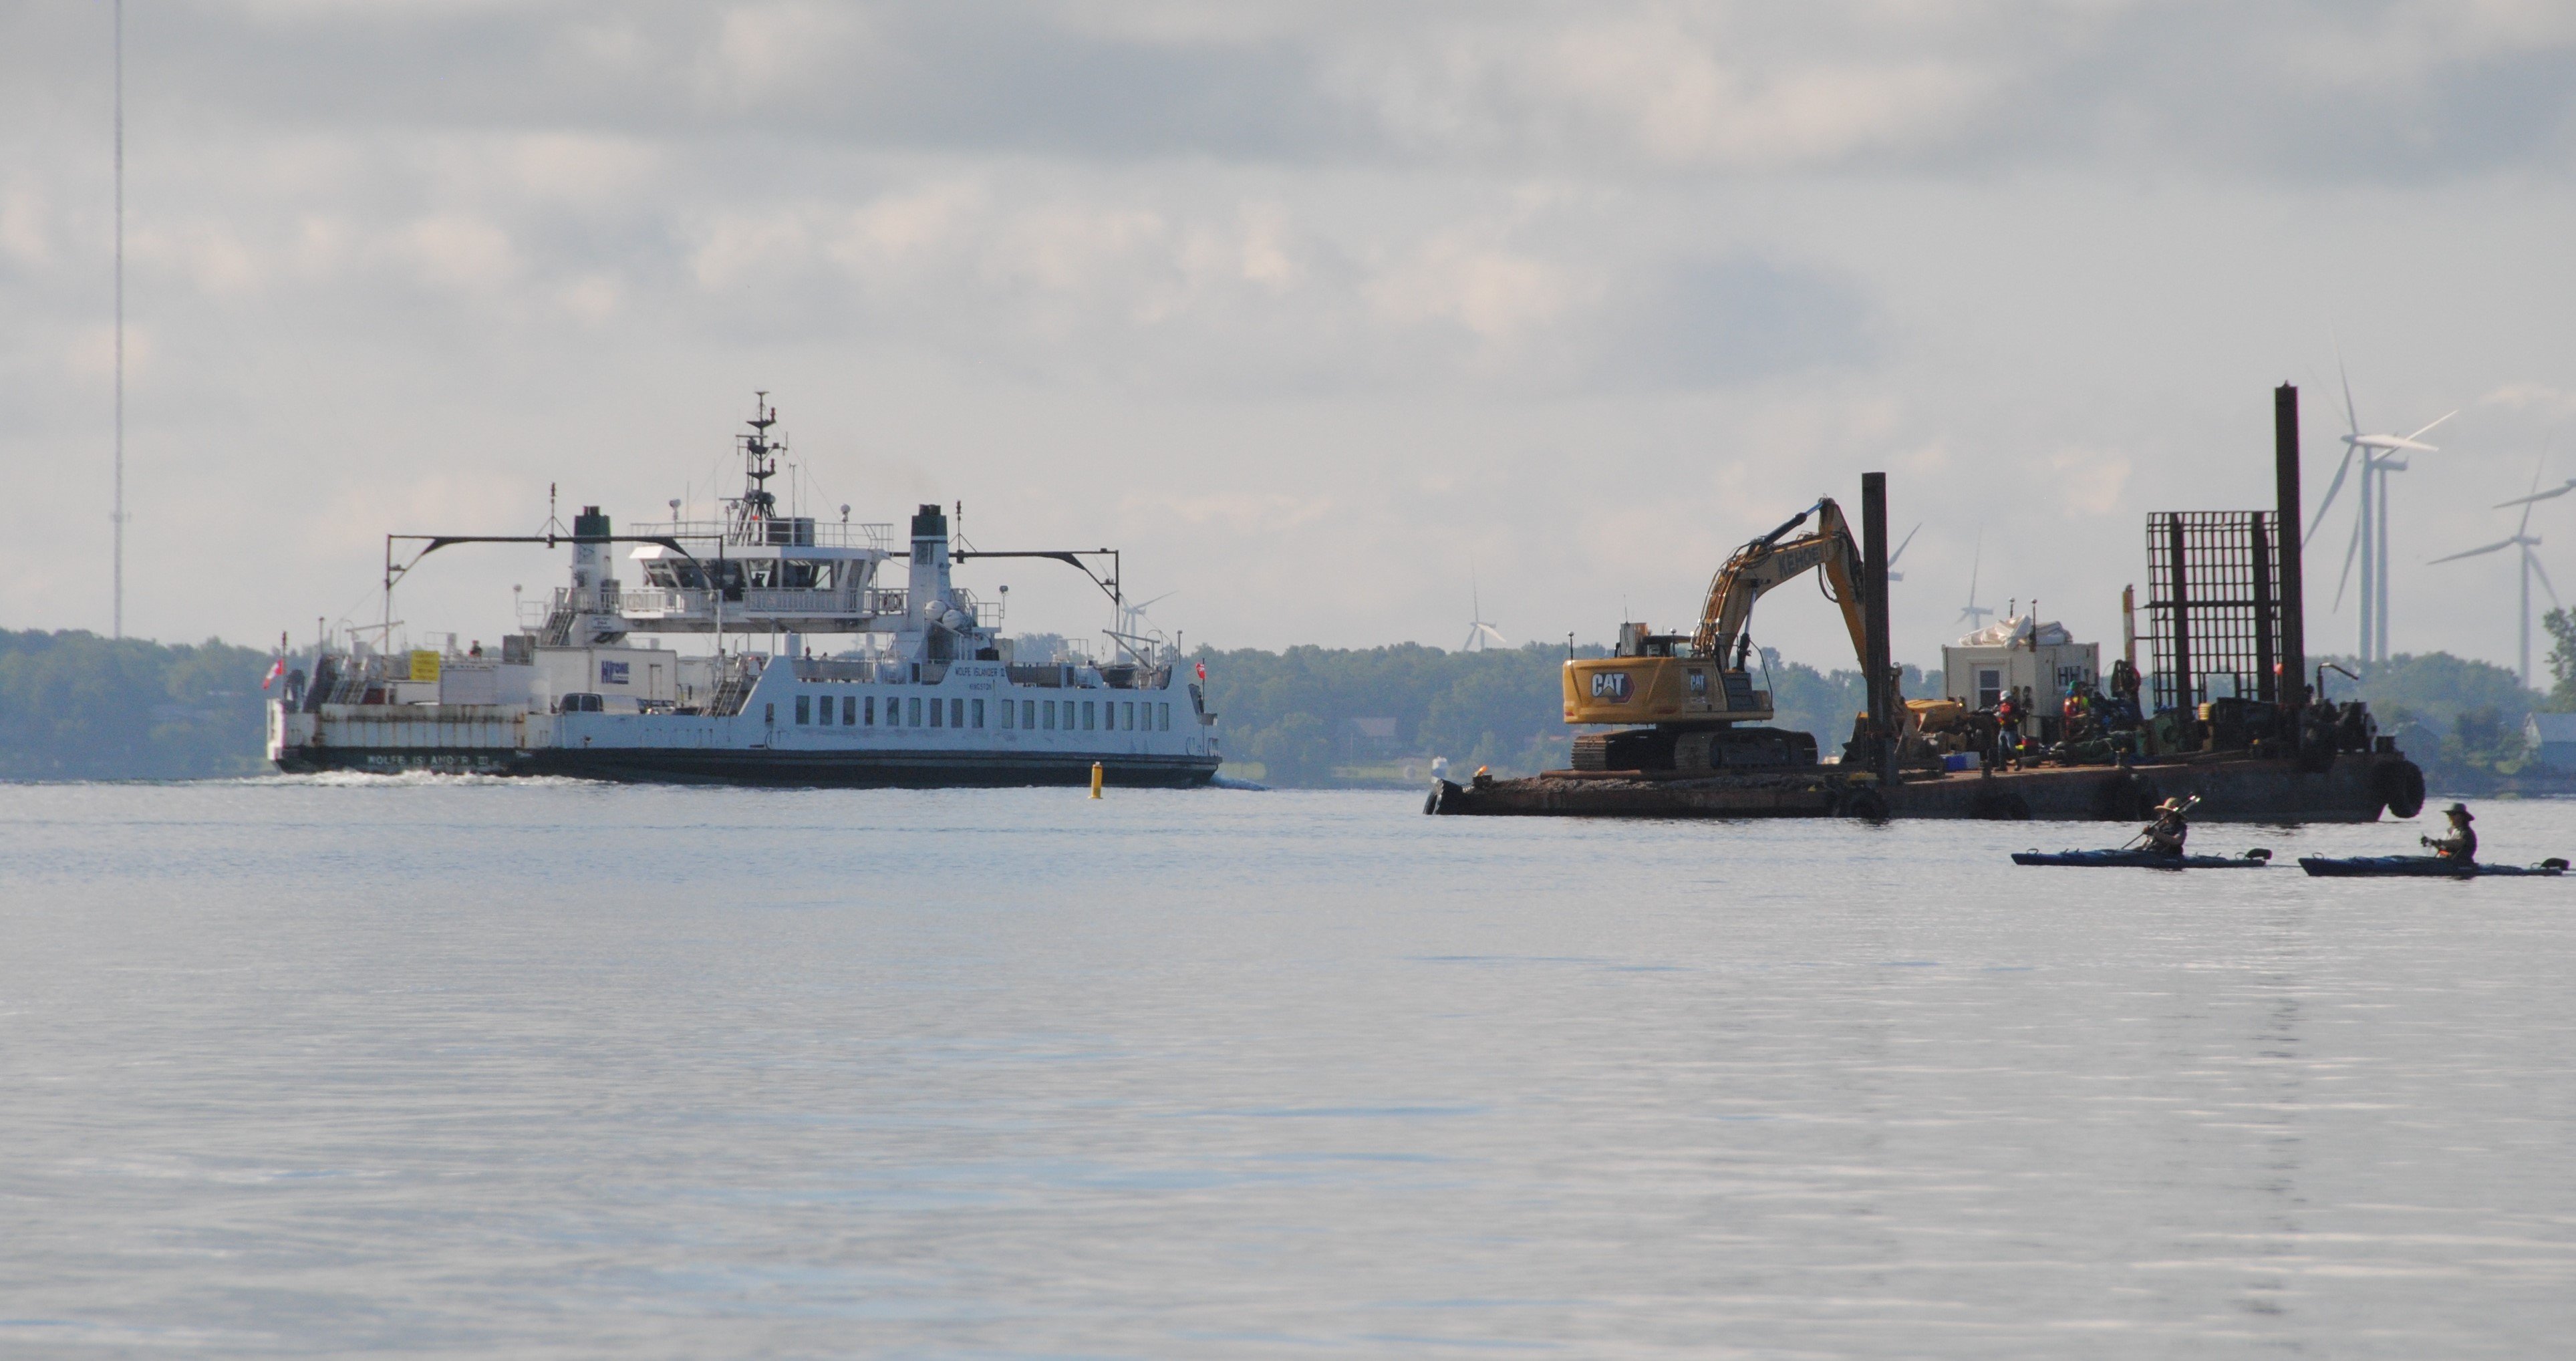 Barges and Equipment for Excavating Sediment